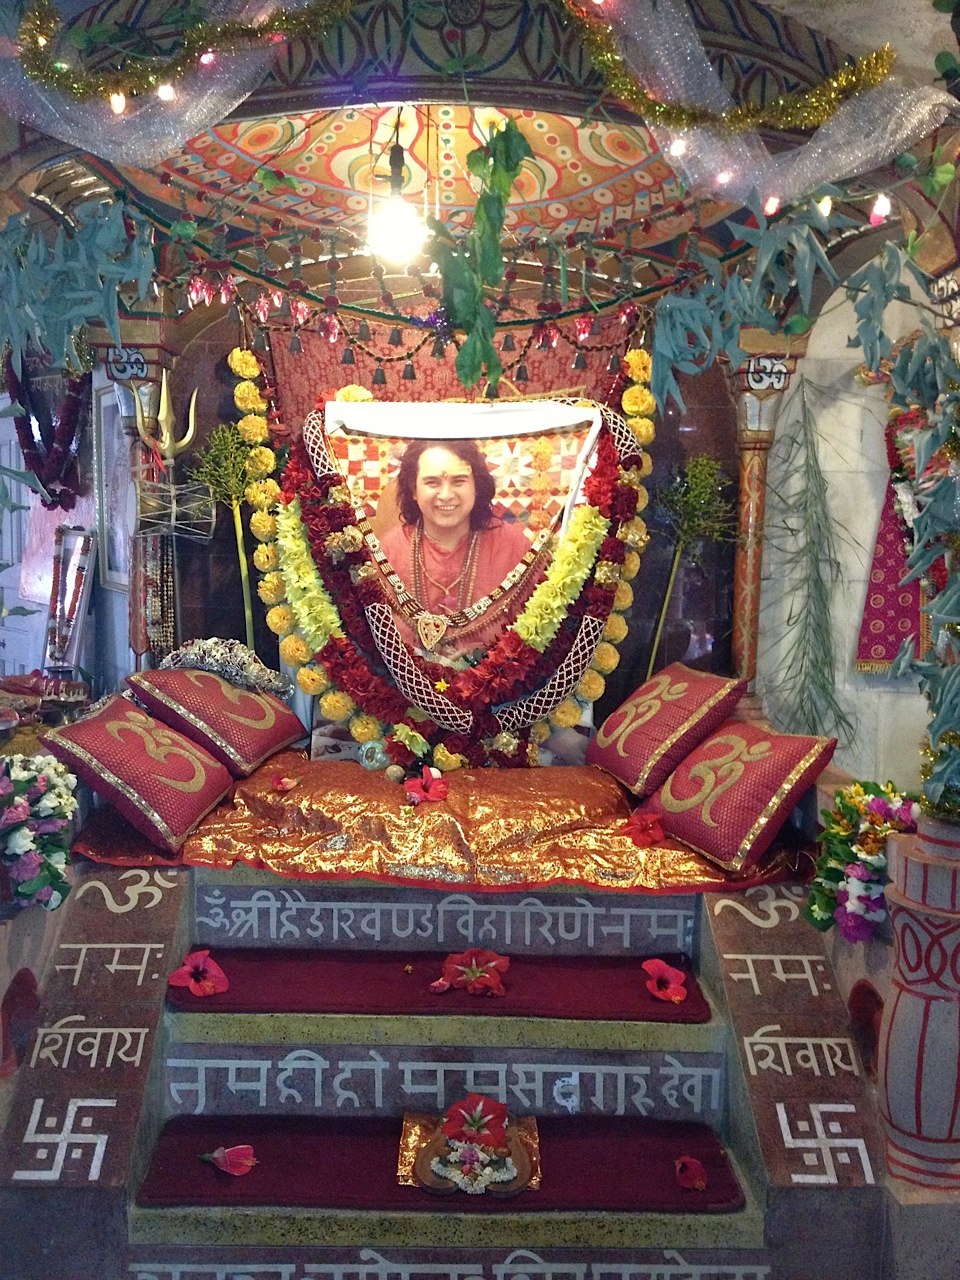 Babaji’s chair in the main temple